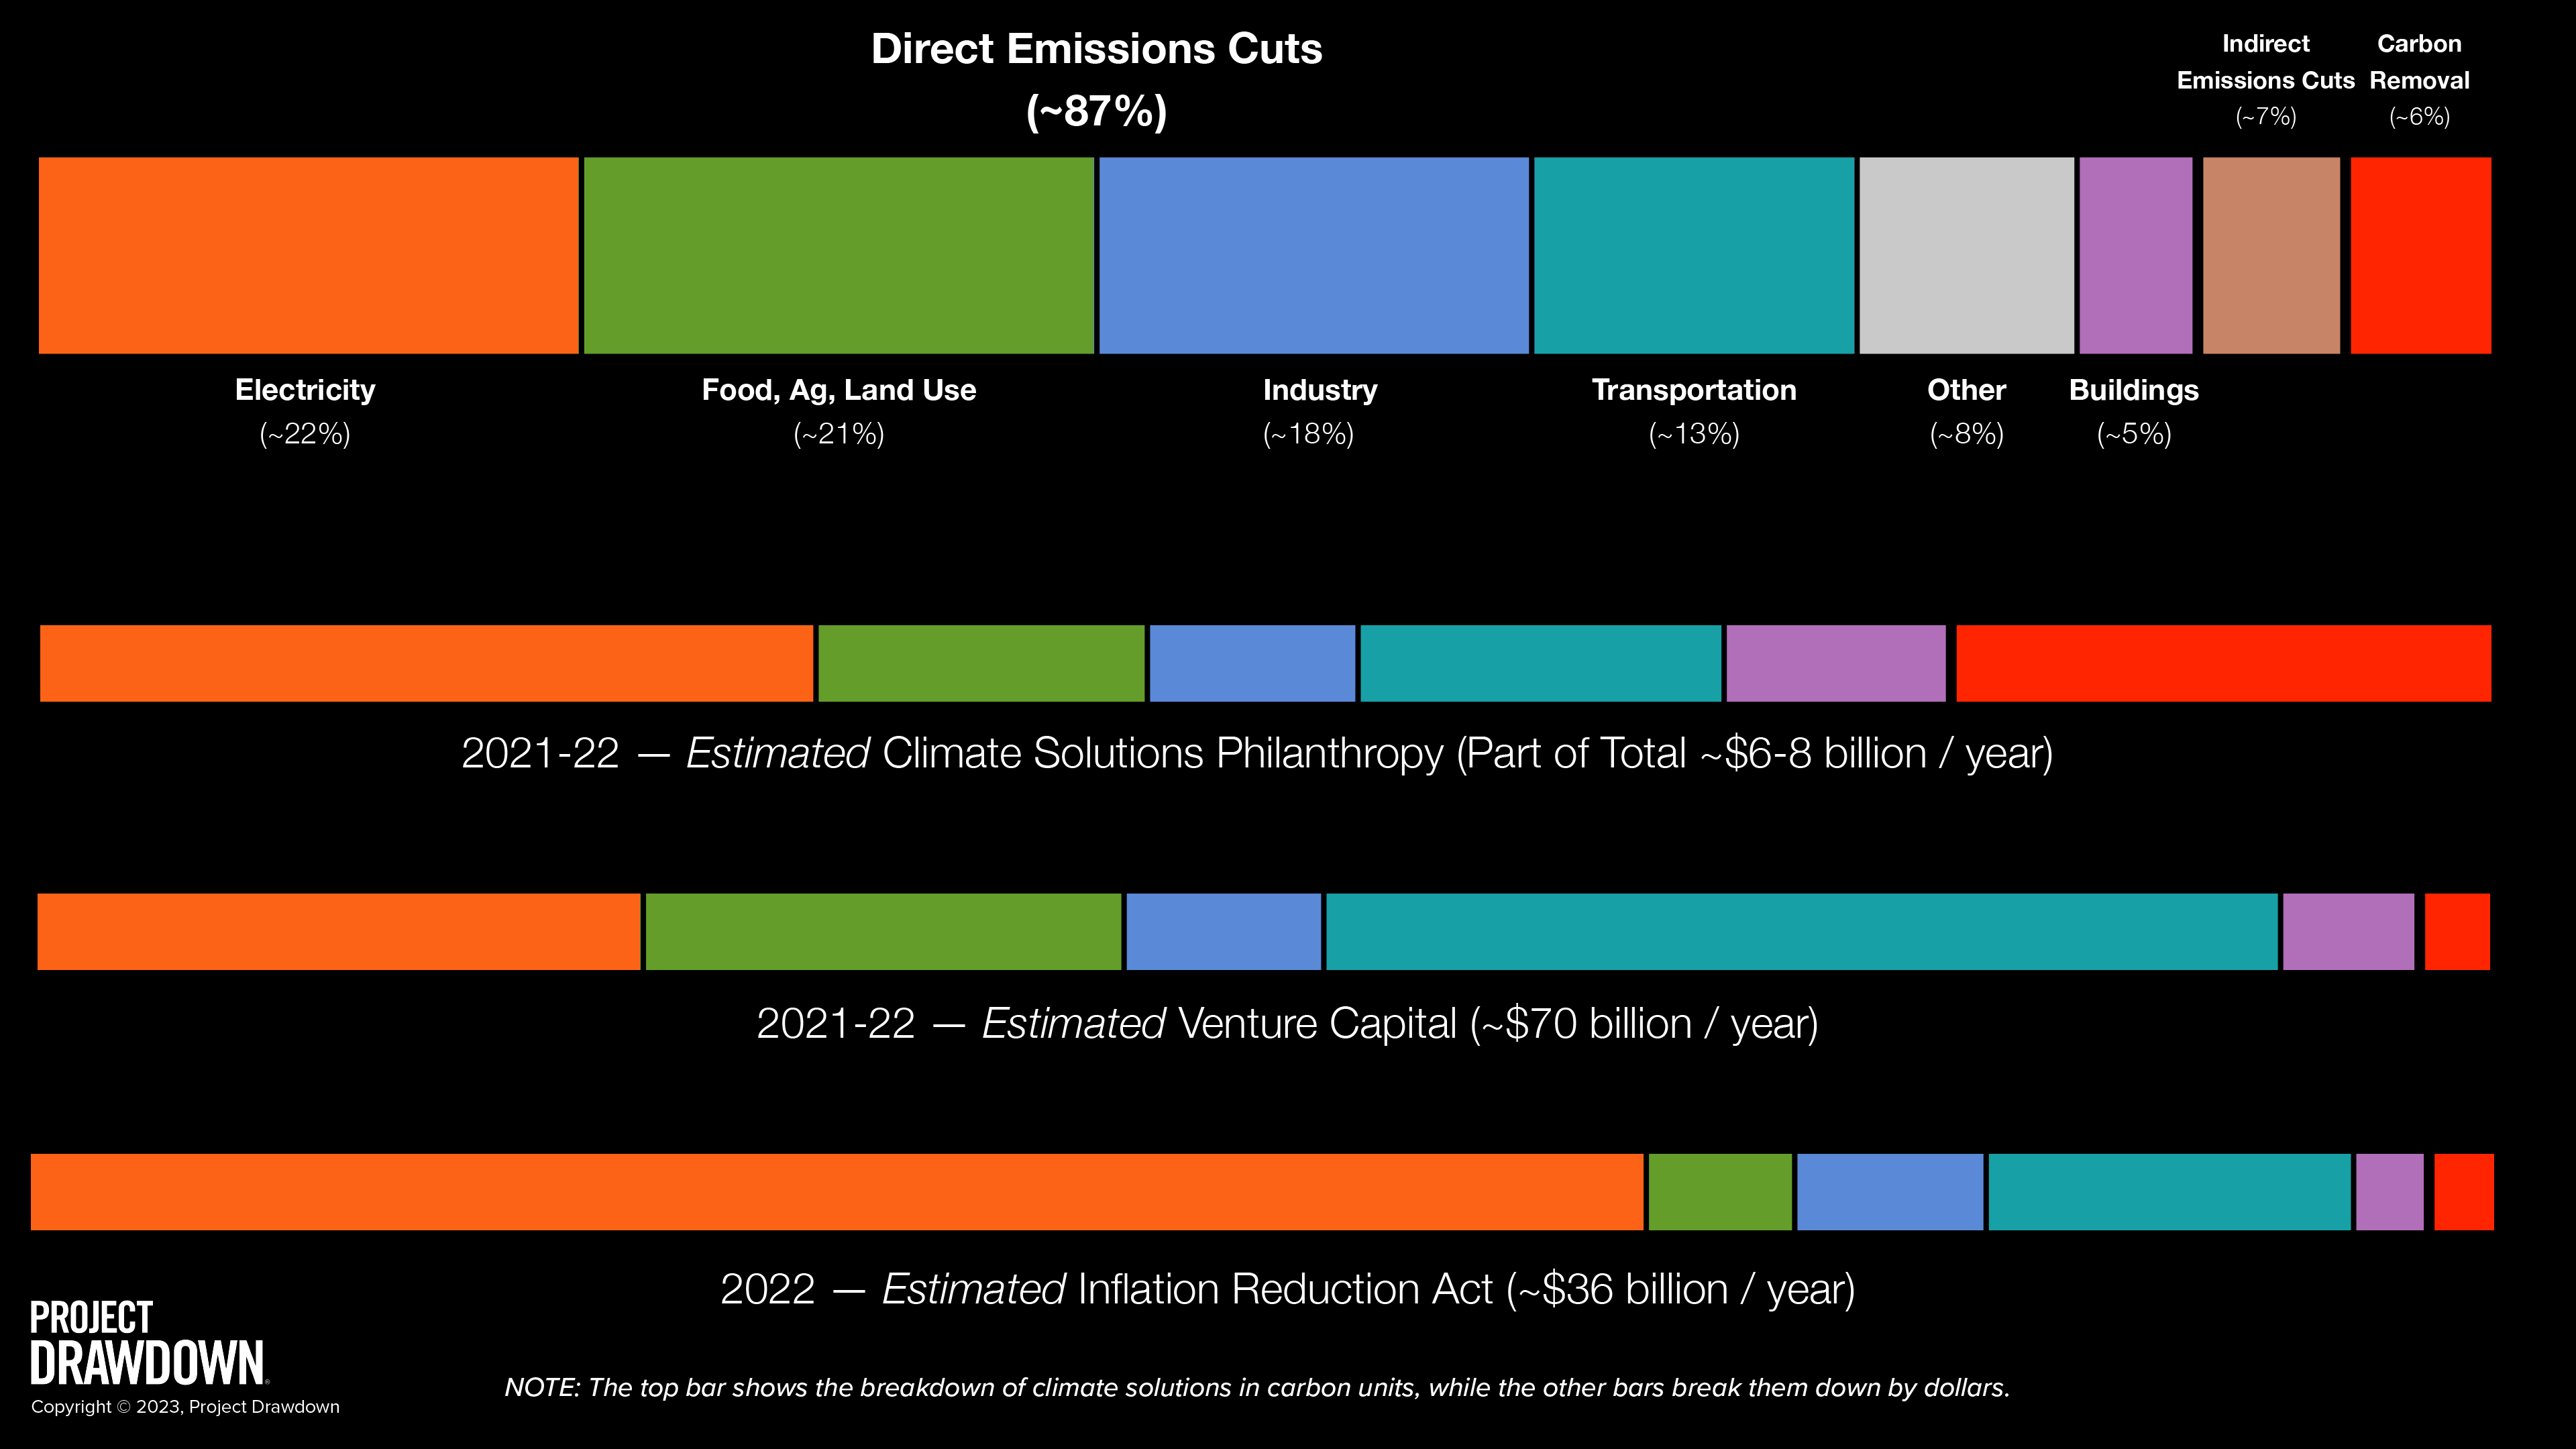 Climate solutions funding is underrepresented in some sectors relative to others. Source: Graphic by Project Drawdown (https://drawdown.org/sites/default/files/DrawdownRoadmap_KeyGraphics06_2x.png), used under a fair use rationale.